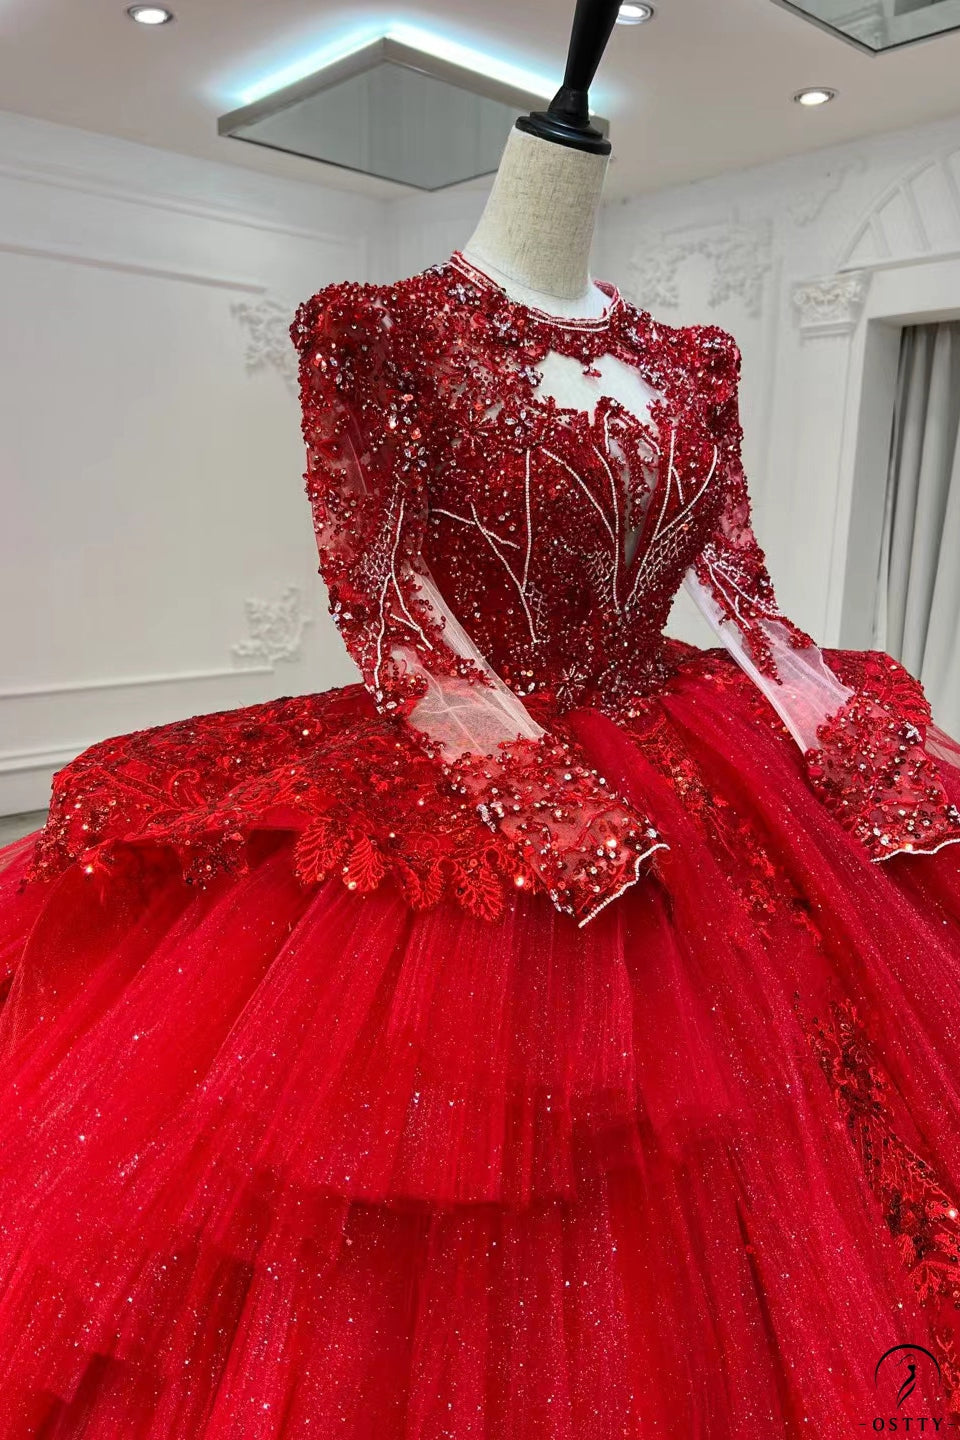 OS8487 Red Wedding Dresses High Neck Long Sleeves Wedding Gowns - $1,499.99